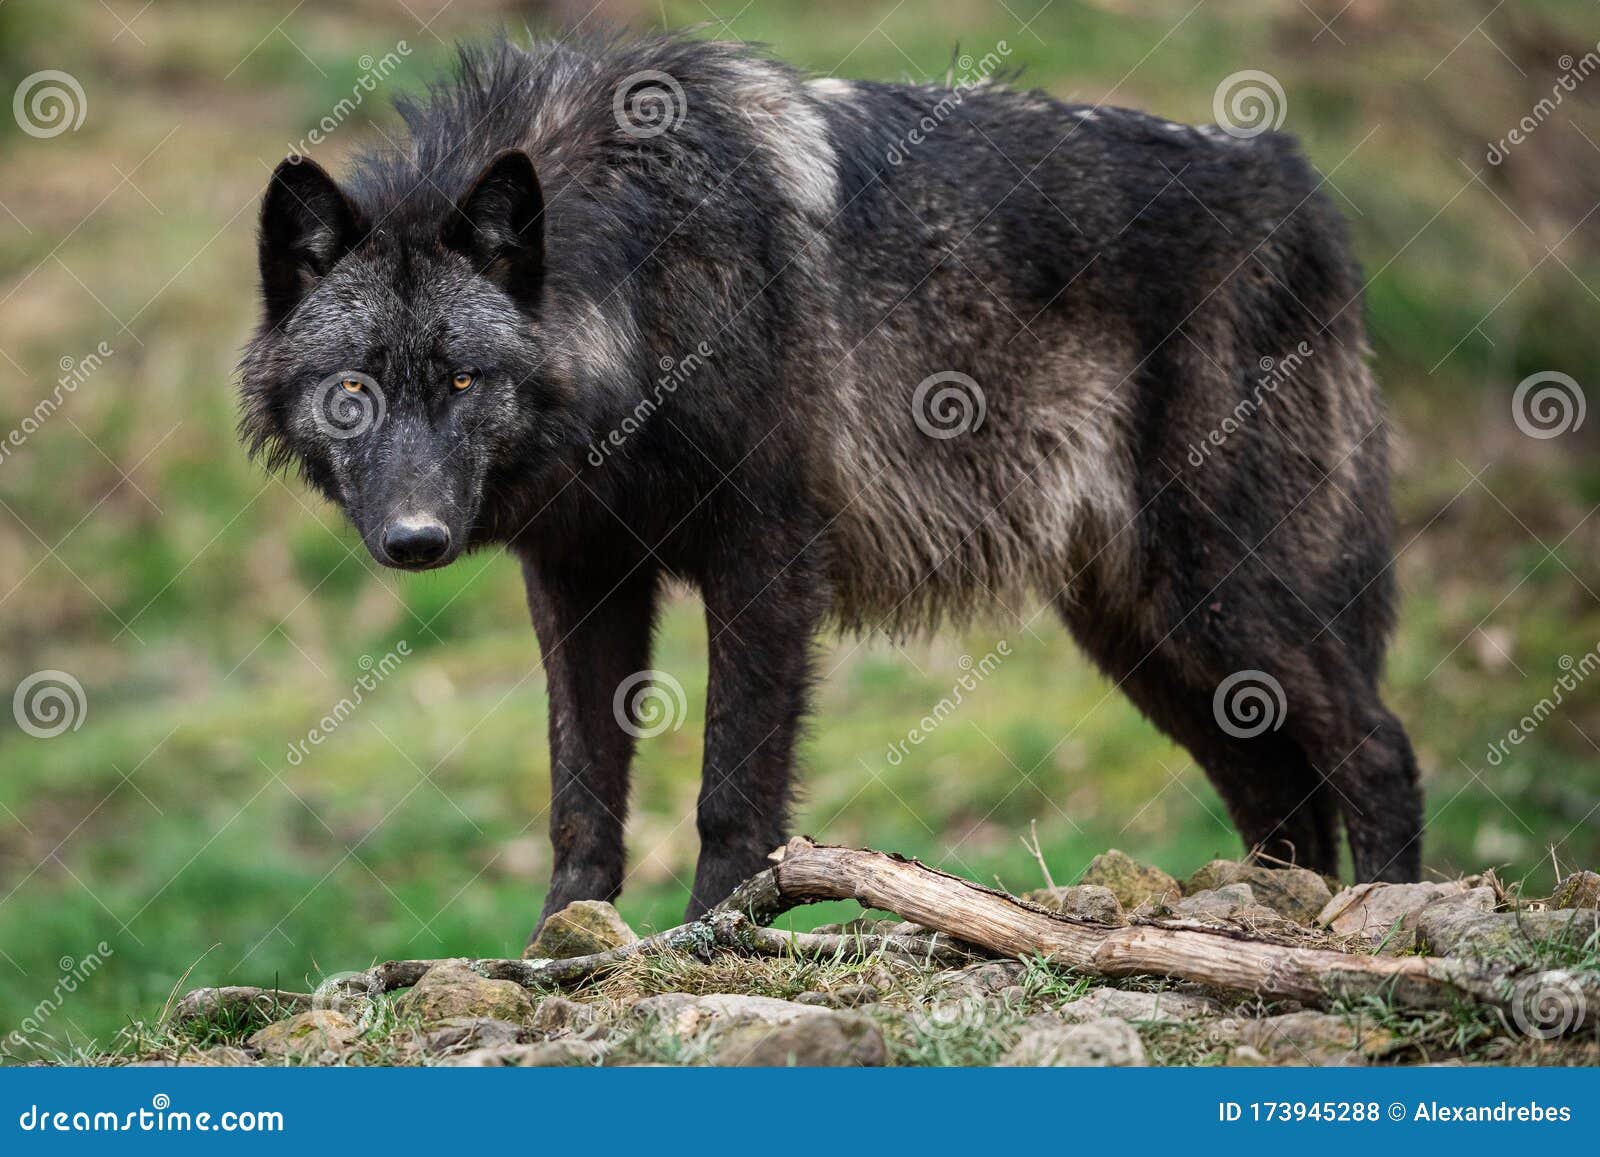 timberwolf in the forest